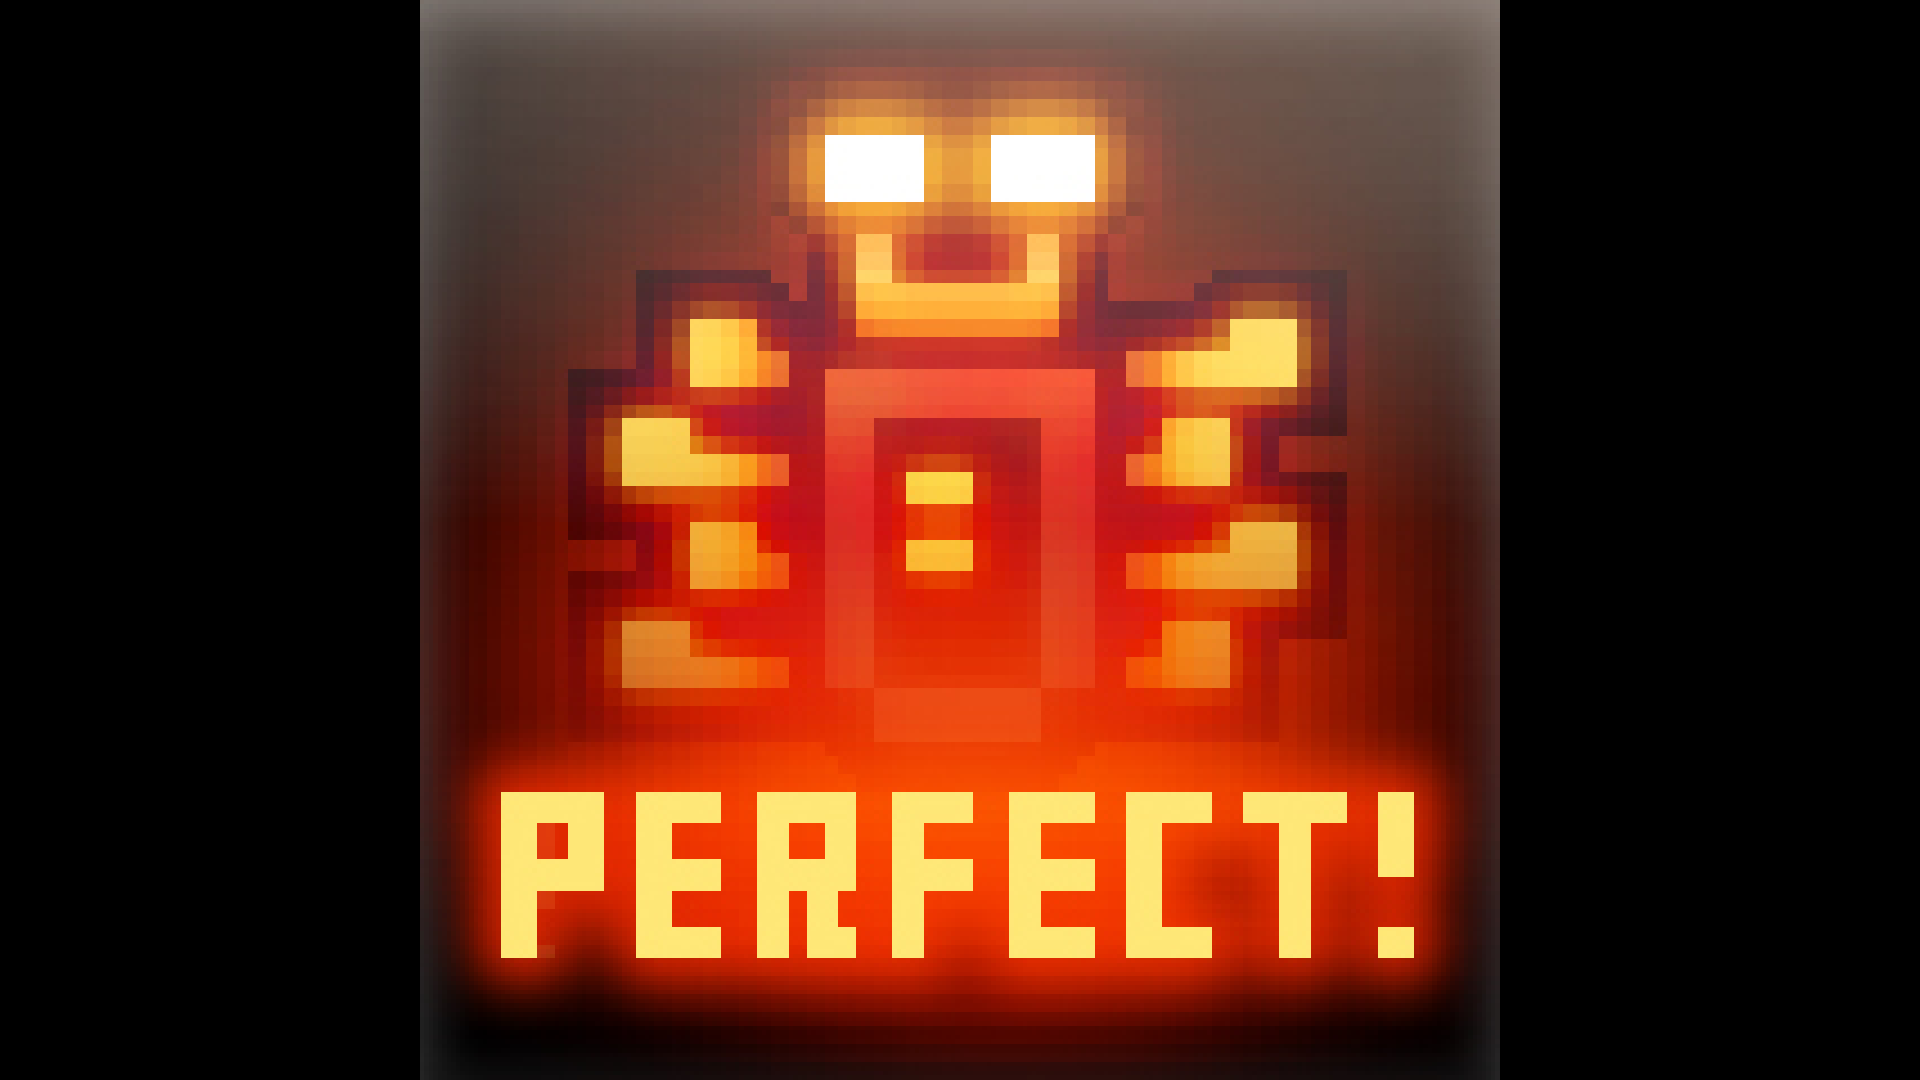 Icon for Challenge Perfect